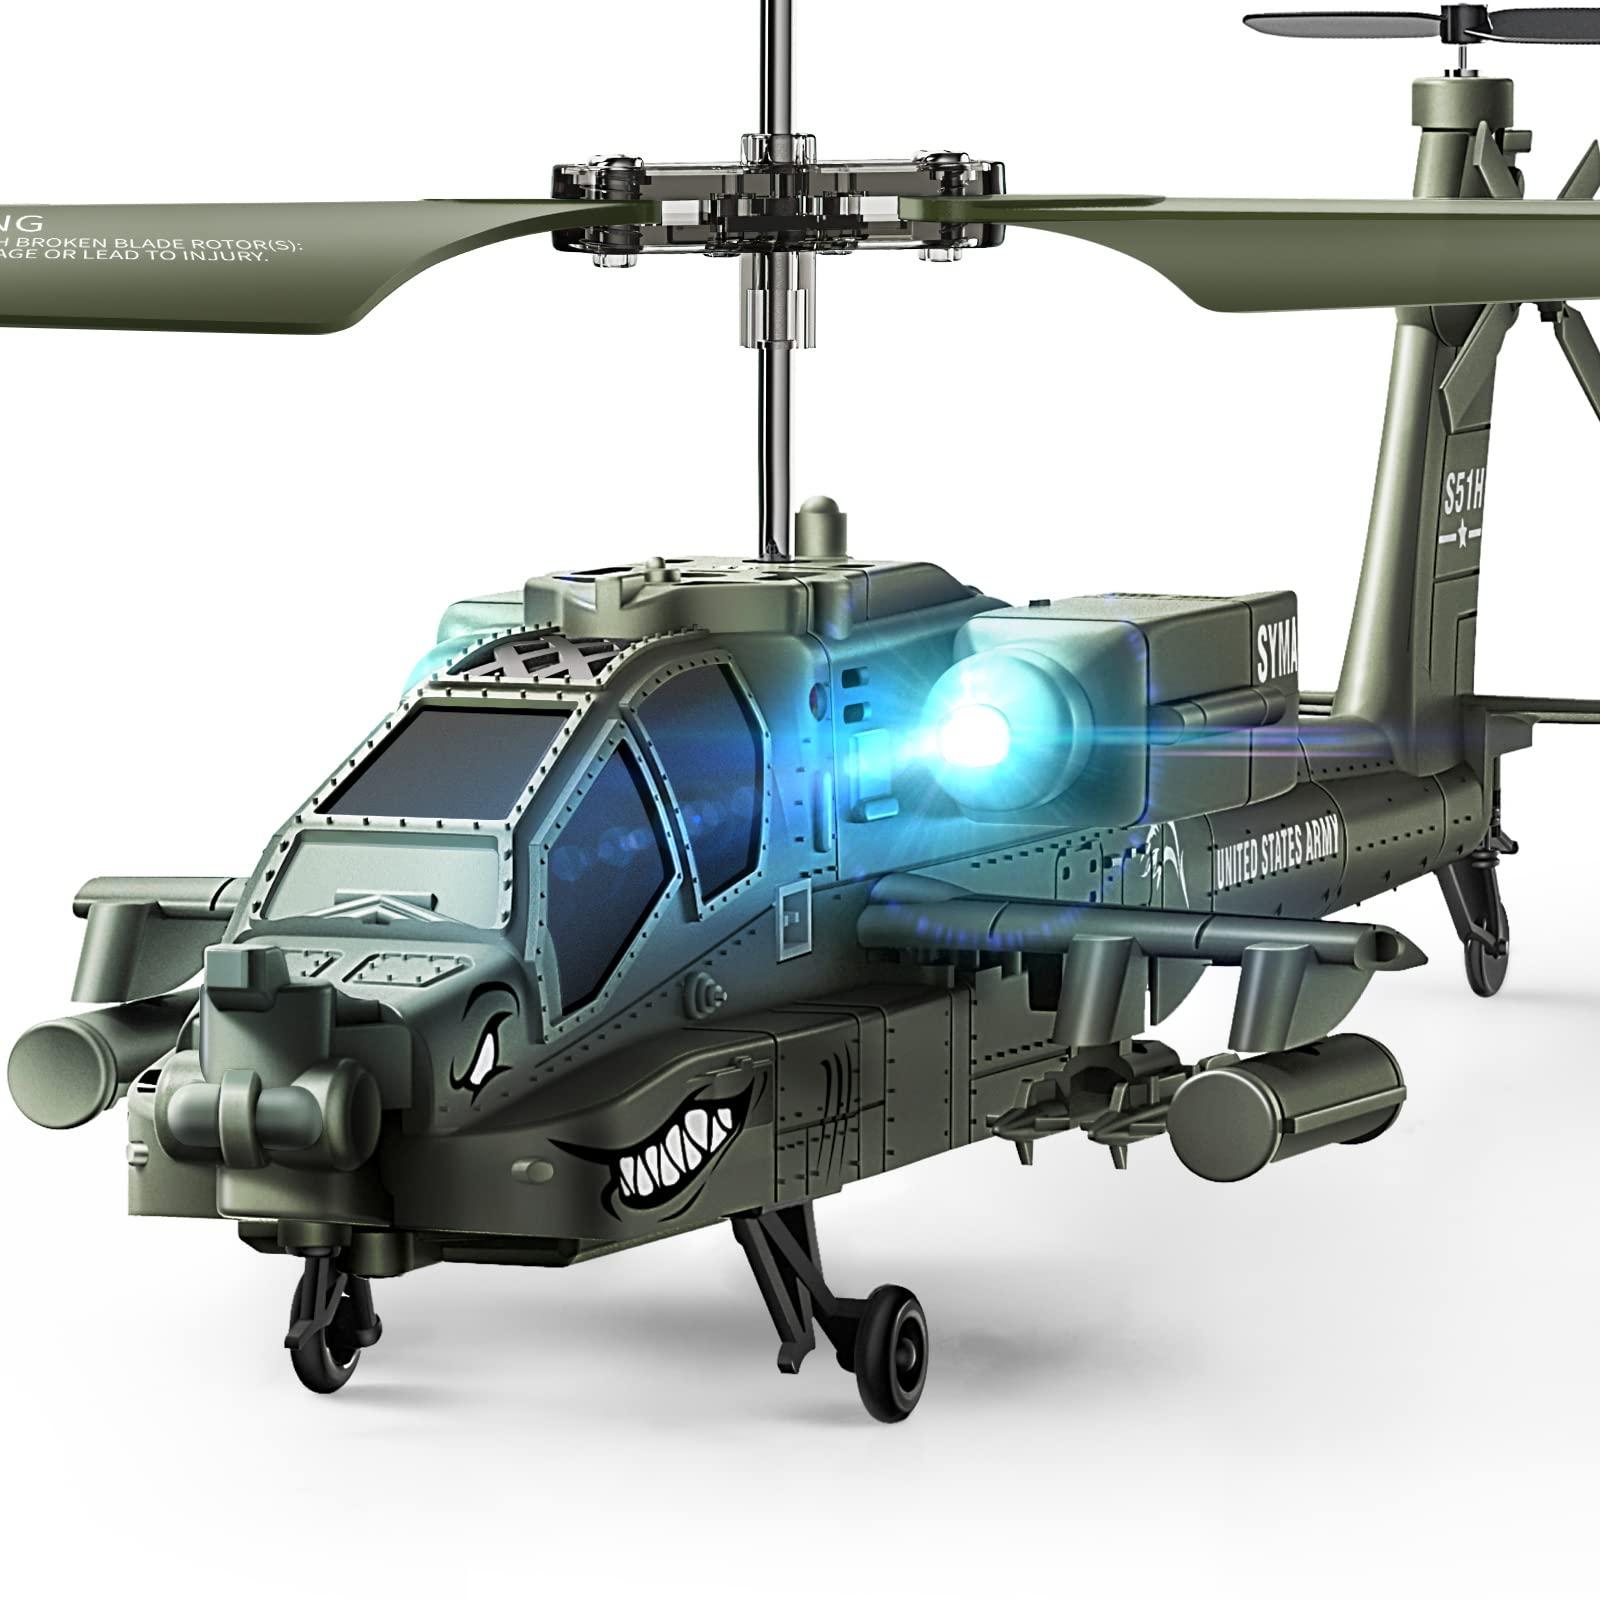 Remote Control Super Helicopter: Safe and thrilling flying with the right remote control super helicopter